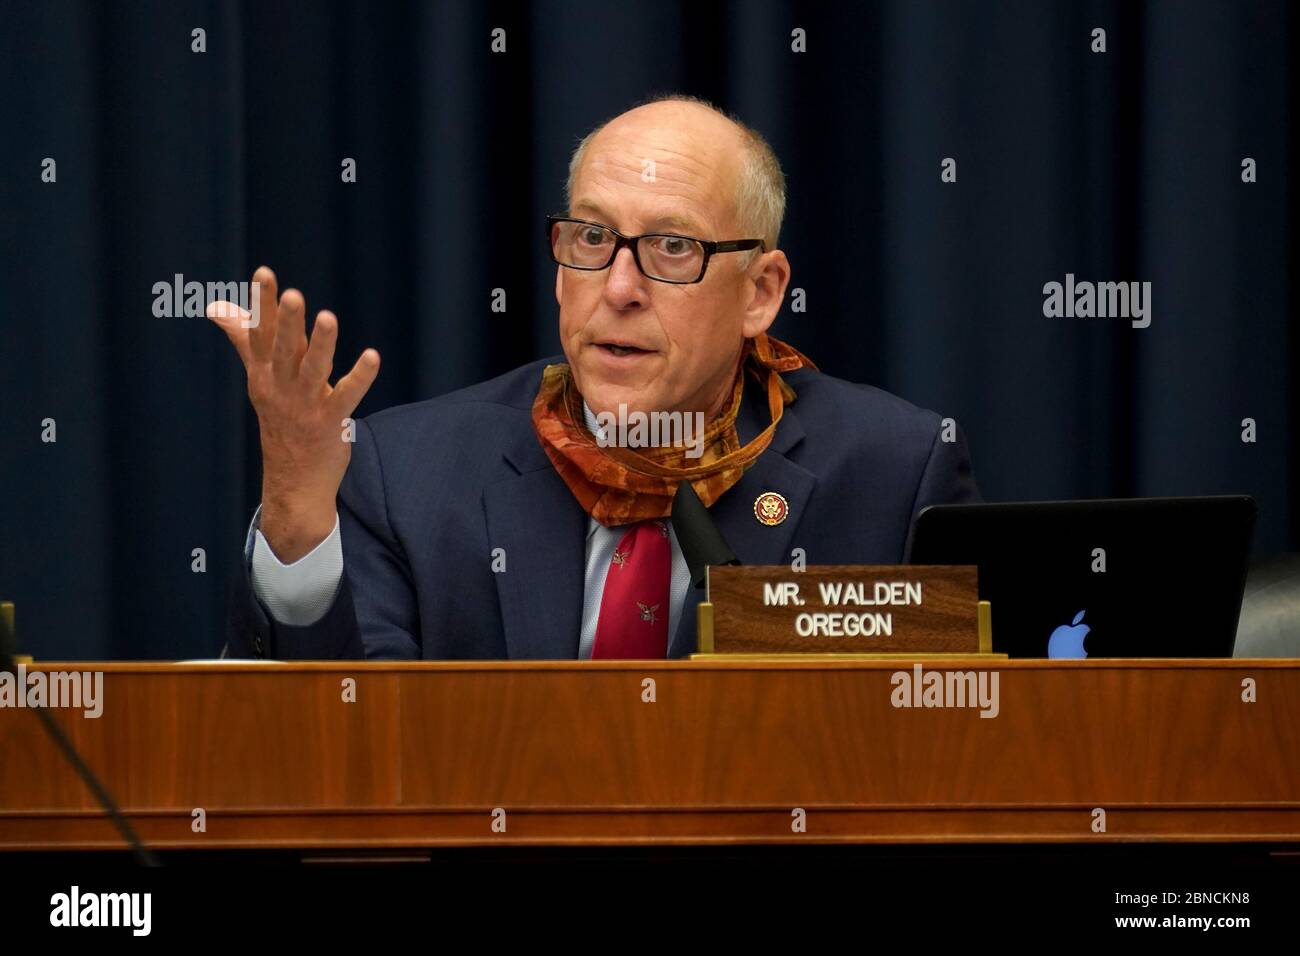 Washington, United States. 14th May, 2020. Rep. Greg Walden (R-Ore.) asks a parliamentary inquiry during a House Energy and Commerce Subcommittee on Health hearing to discuss protecting scientific integrity in response to the coronavirus outbreak on Capitol Hill in Washington, DC on Thursday, May 14, 2020. Pool Photo by Greg Nash/UPI Credit: UPI/Alamy Live News Stock Photo